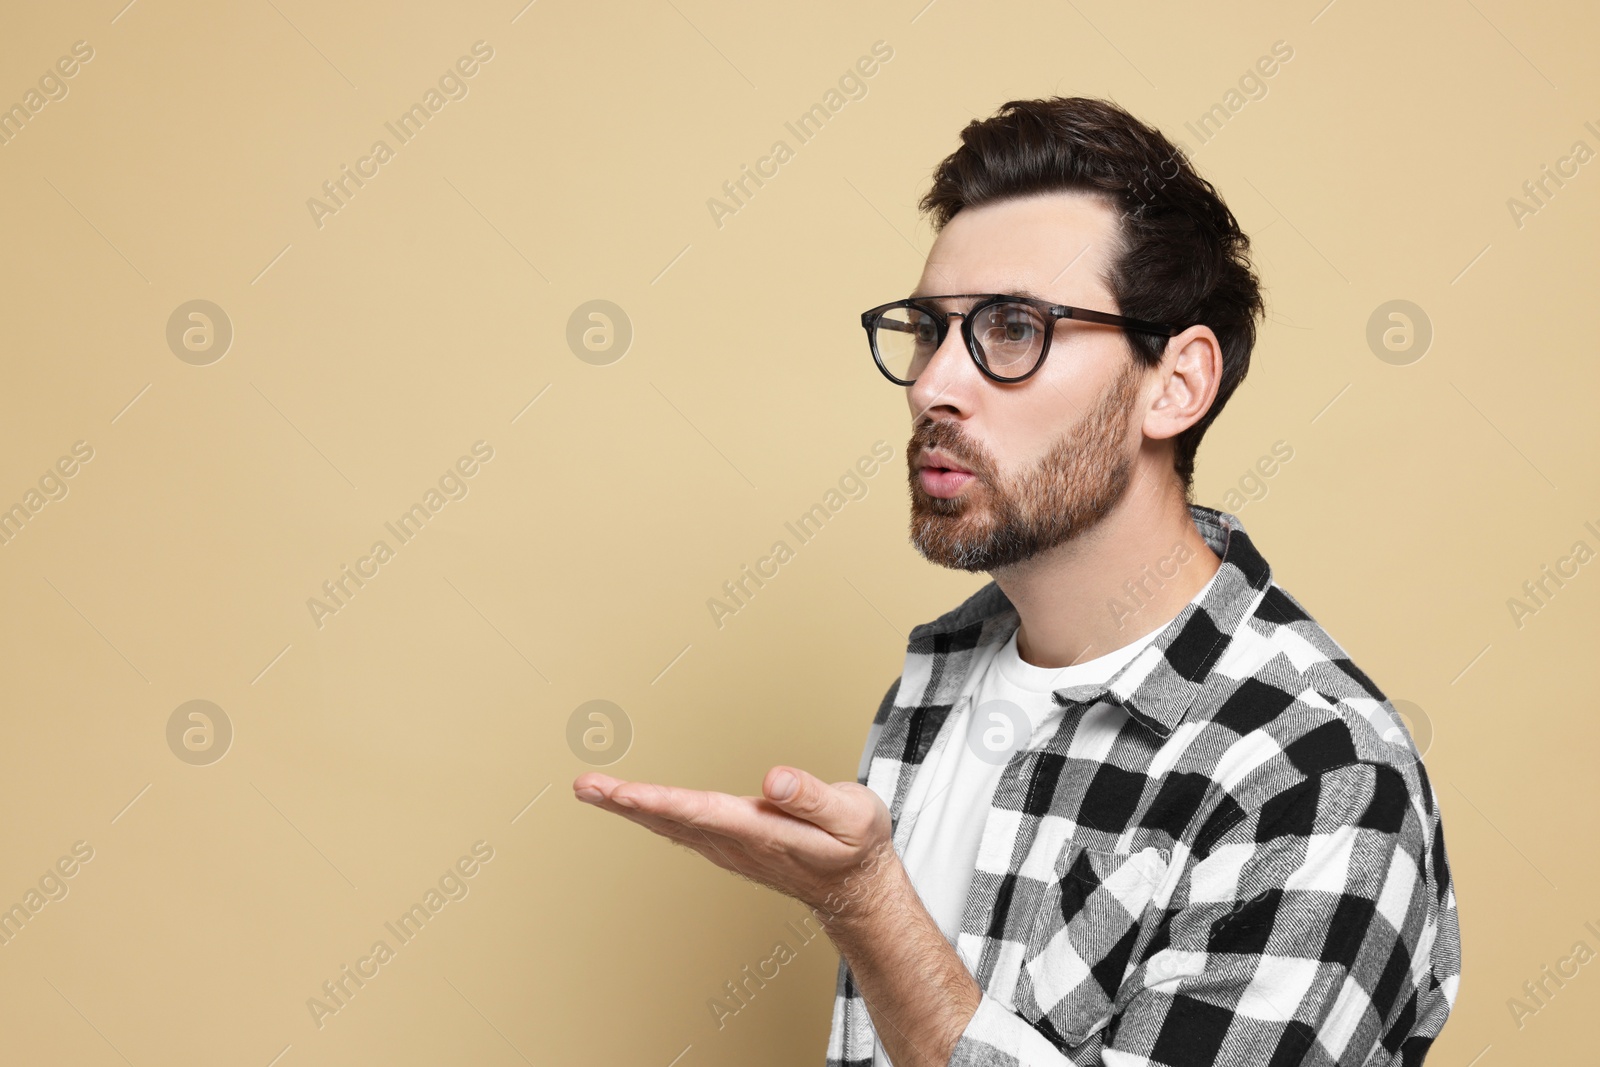 Photo of Handsome man blowing kiss on beige background. Space for text